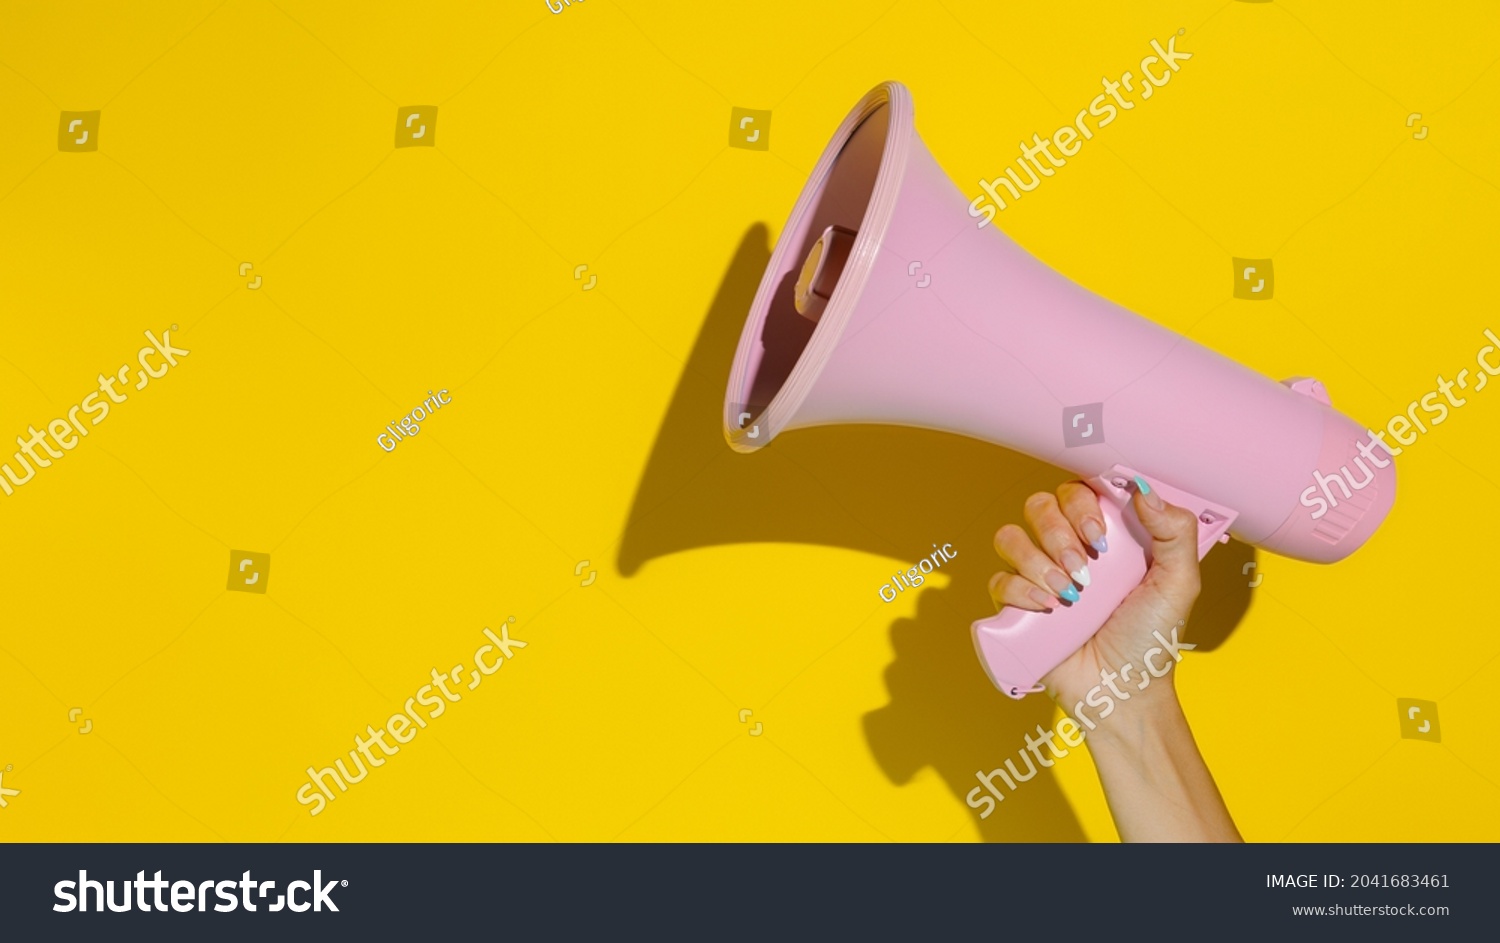 A woman's hand holding a pink megaphone isolated on a yellow background. Creative announcement concept. Loud voice of women. Women's rights and voice. Advertisement mock up with copy space for text. #2041683461